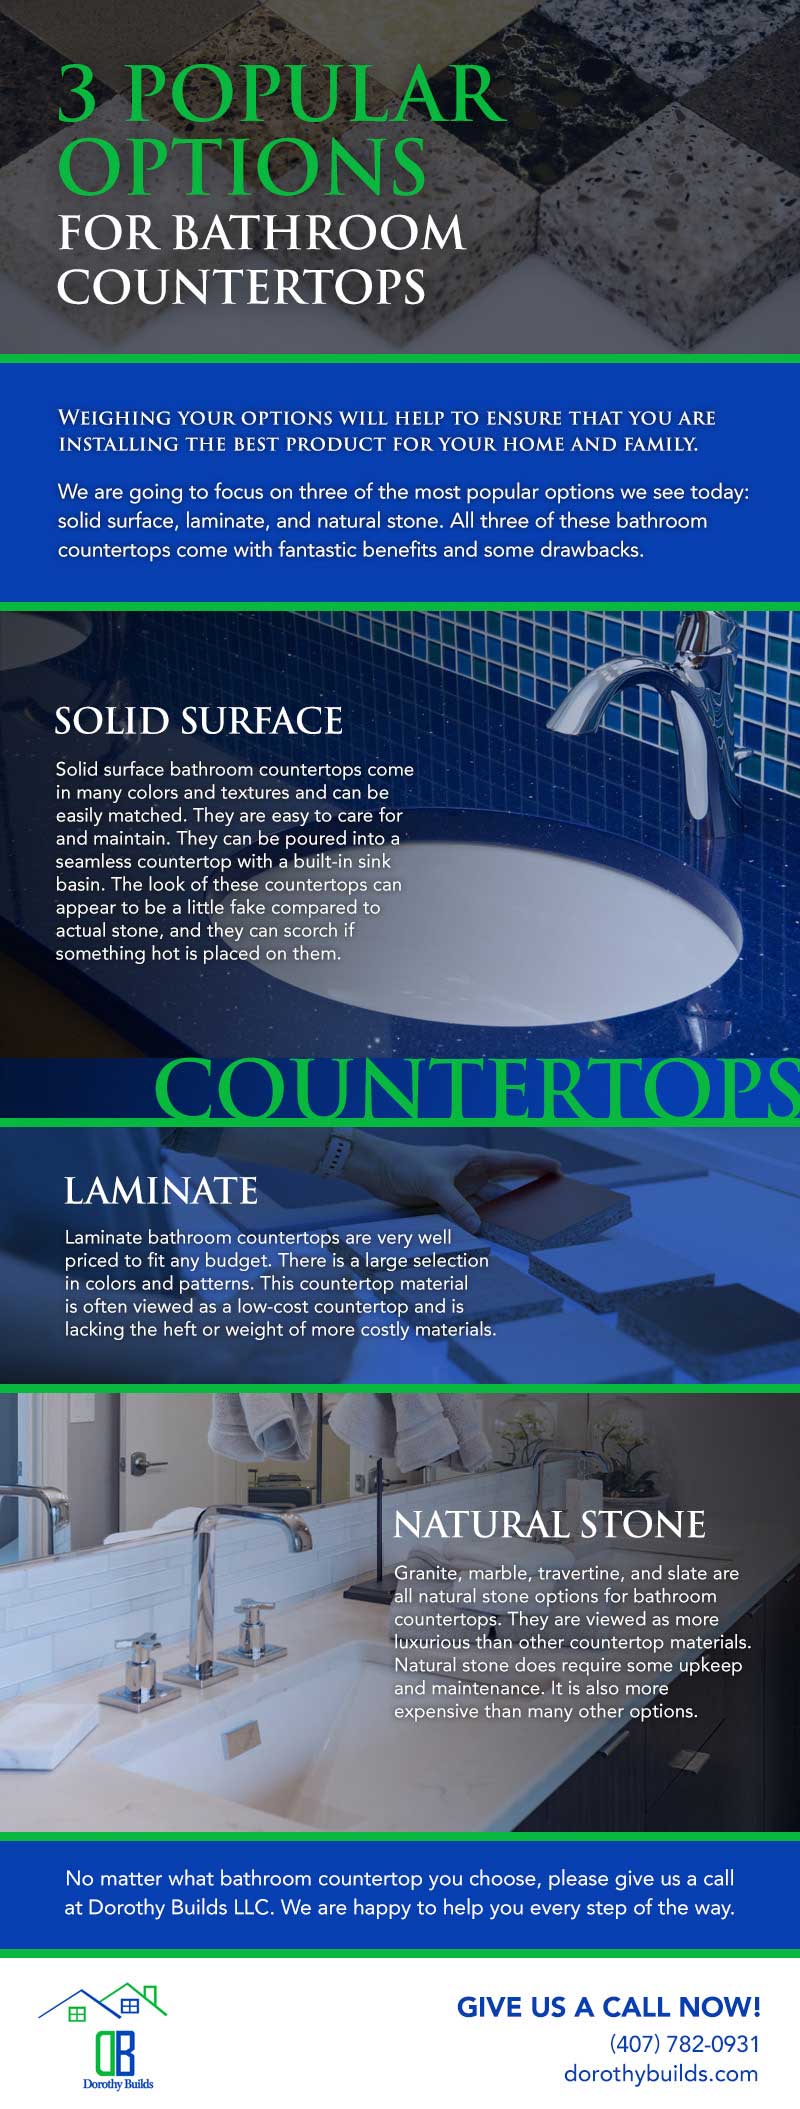 Bathroom Countertops: Pros and Cons of Three Popular Options